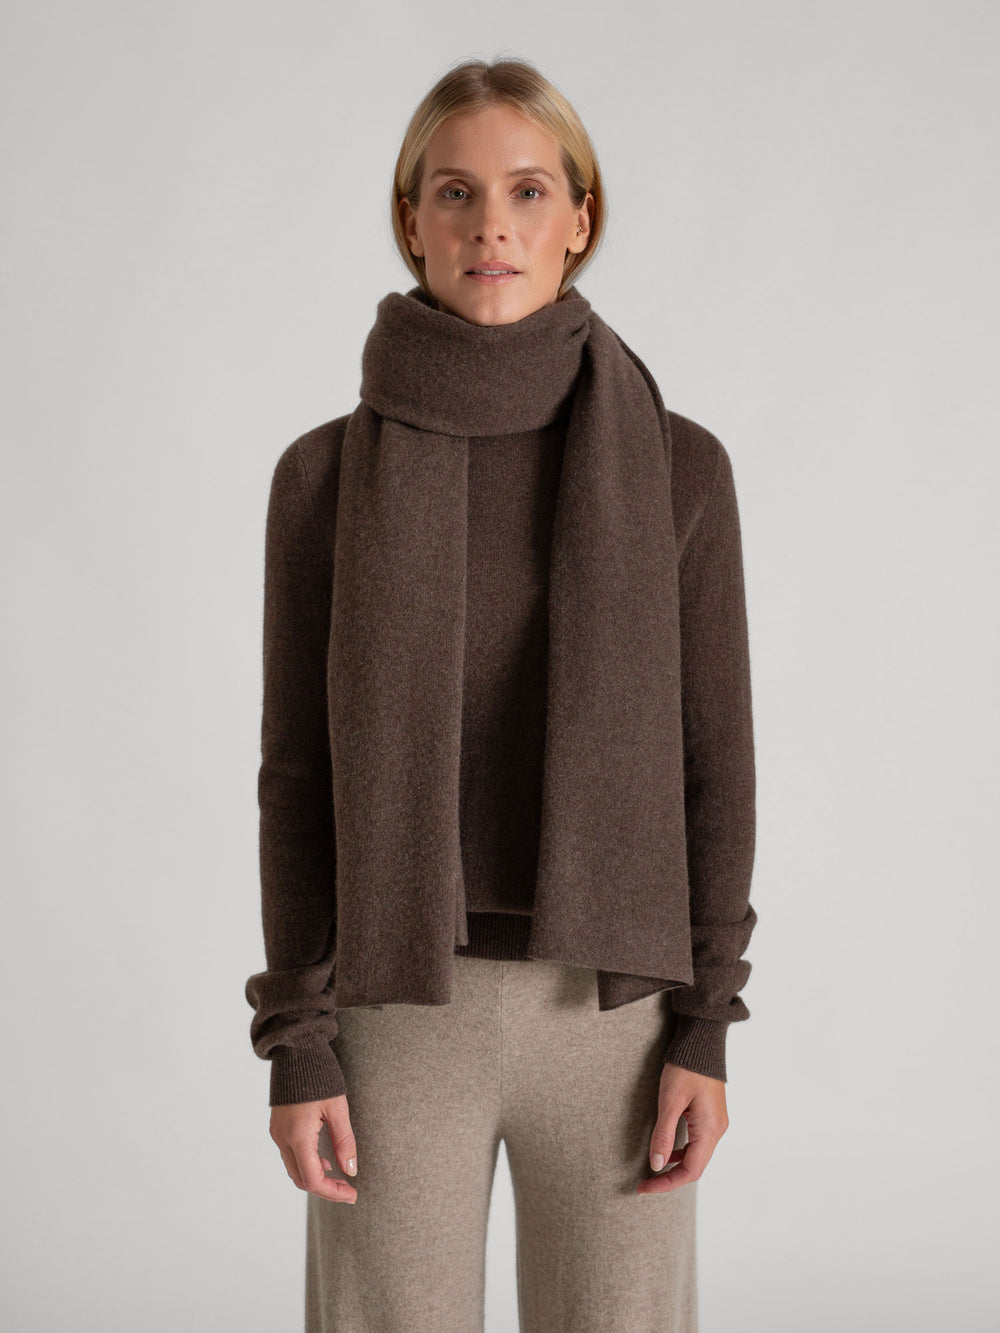 Airy cashmere scarf "Flow" in color: Dark Brown. 100% cashmere from kashmina.